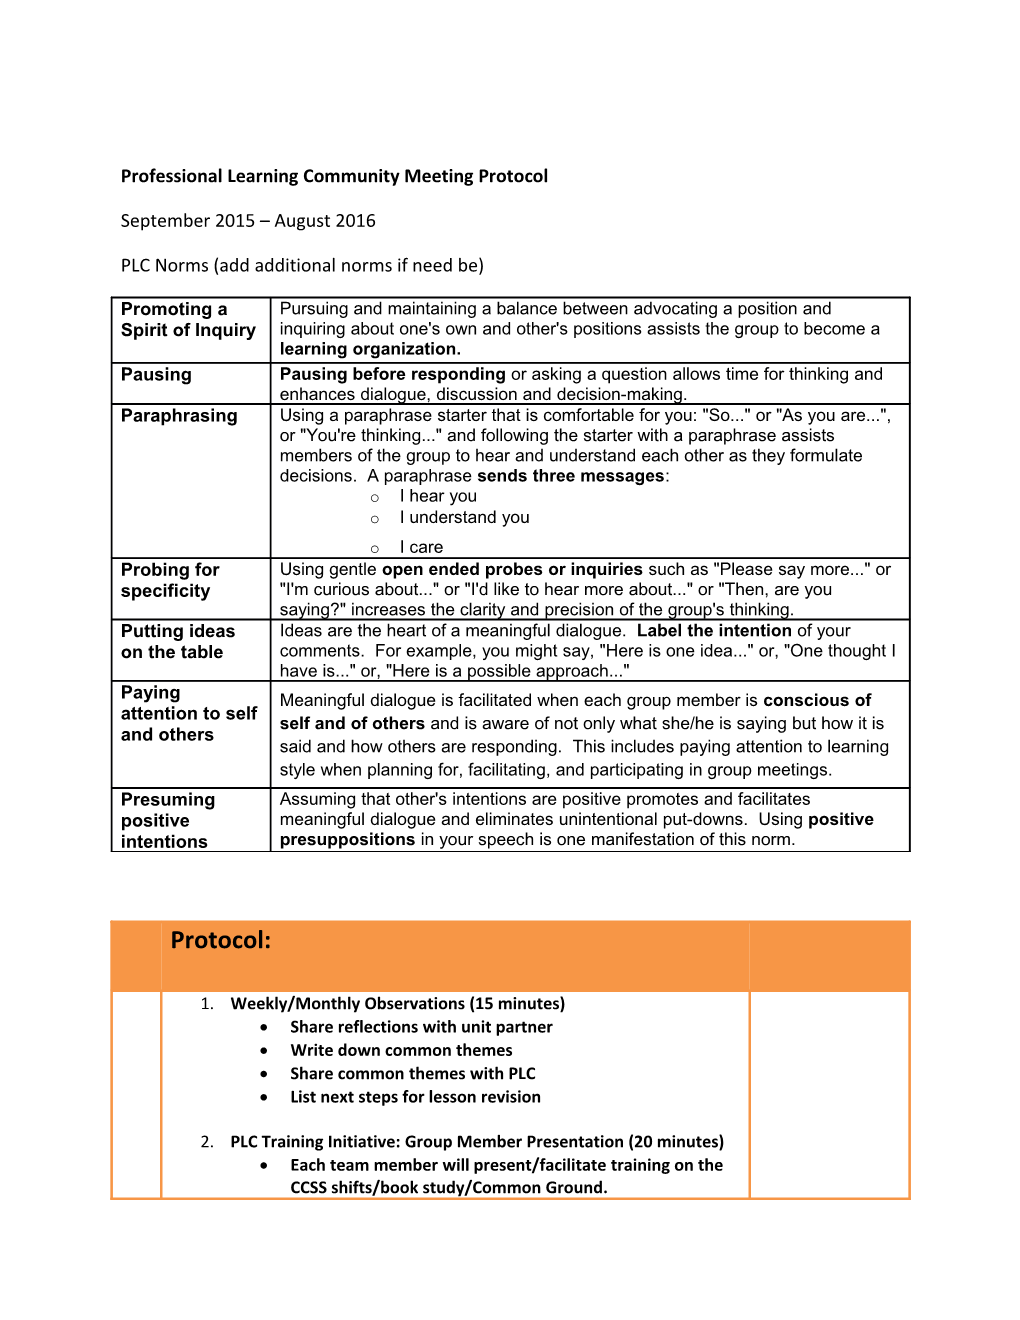 Professional Learning Community Meeting Protocol